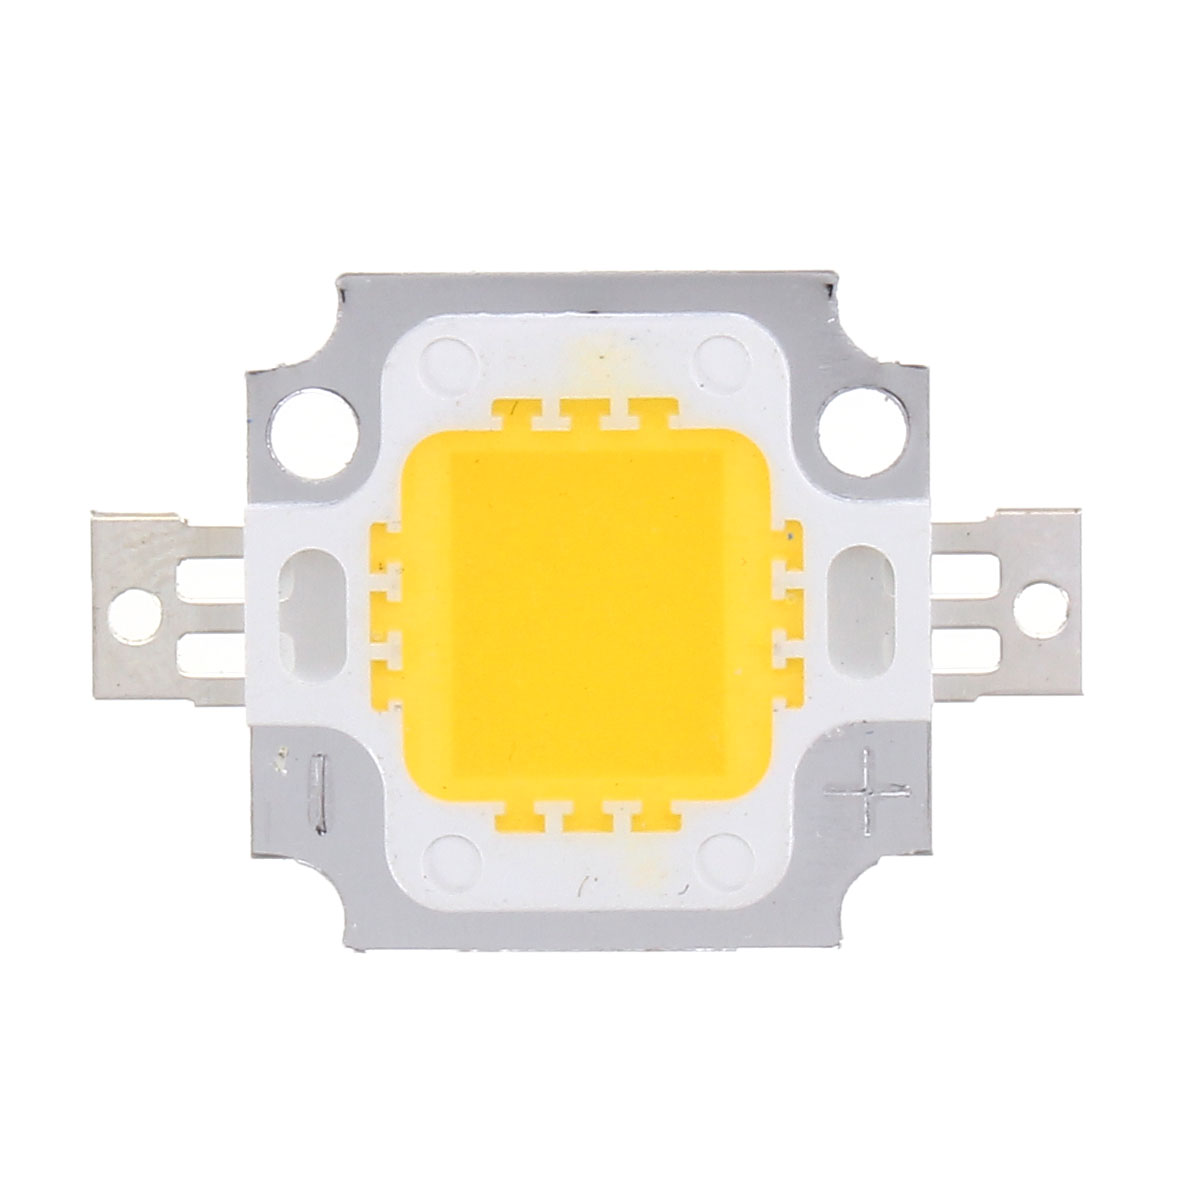 5W-Waterproof-High-Power-Supply-SMD-Chip--LED-Driver-for-DIY-Flood-Light-AC85-265V-1160477-2